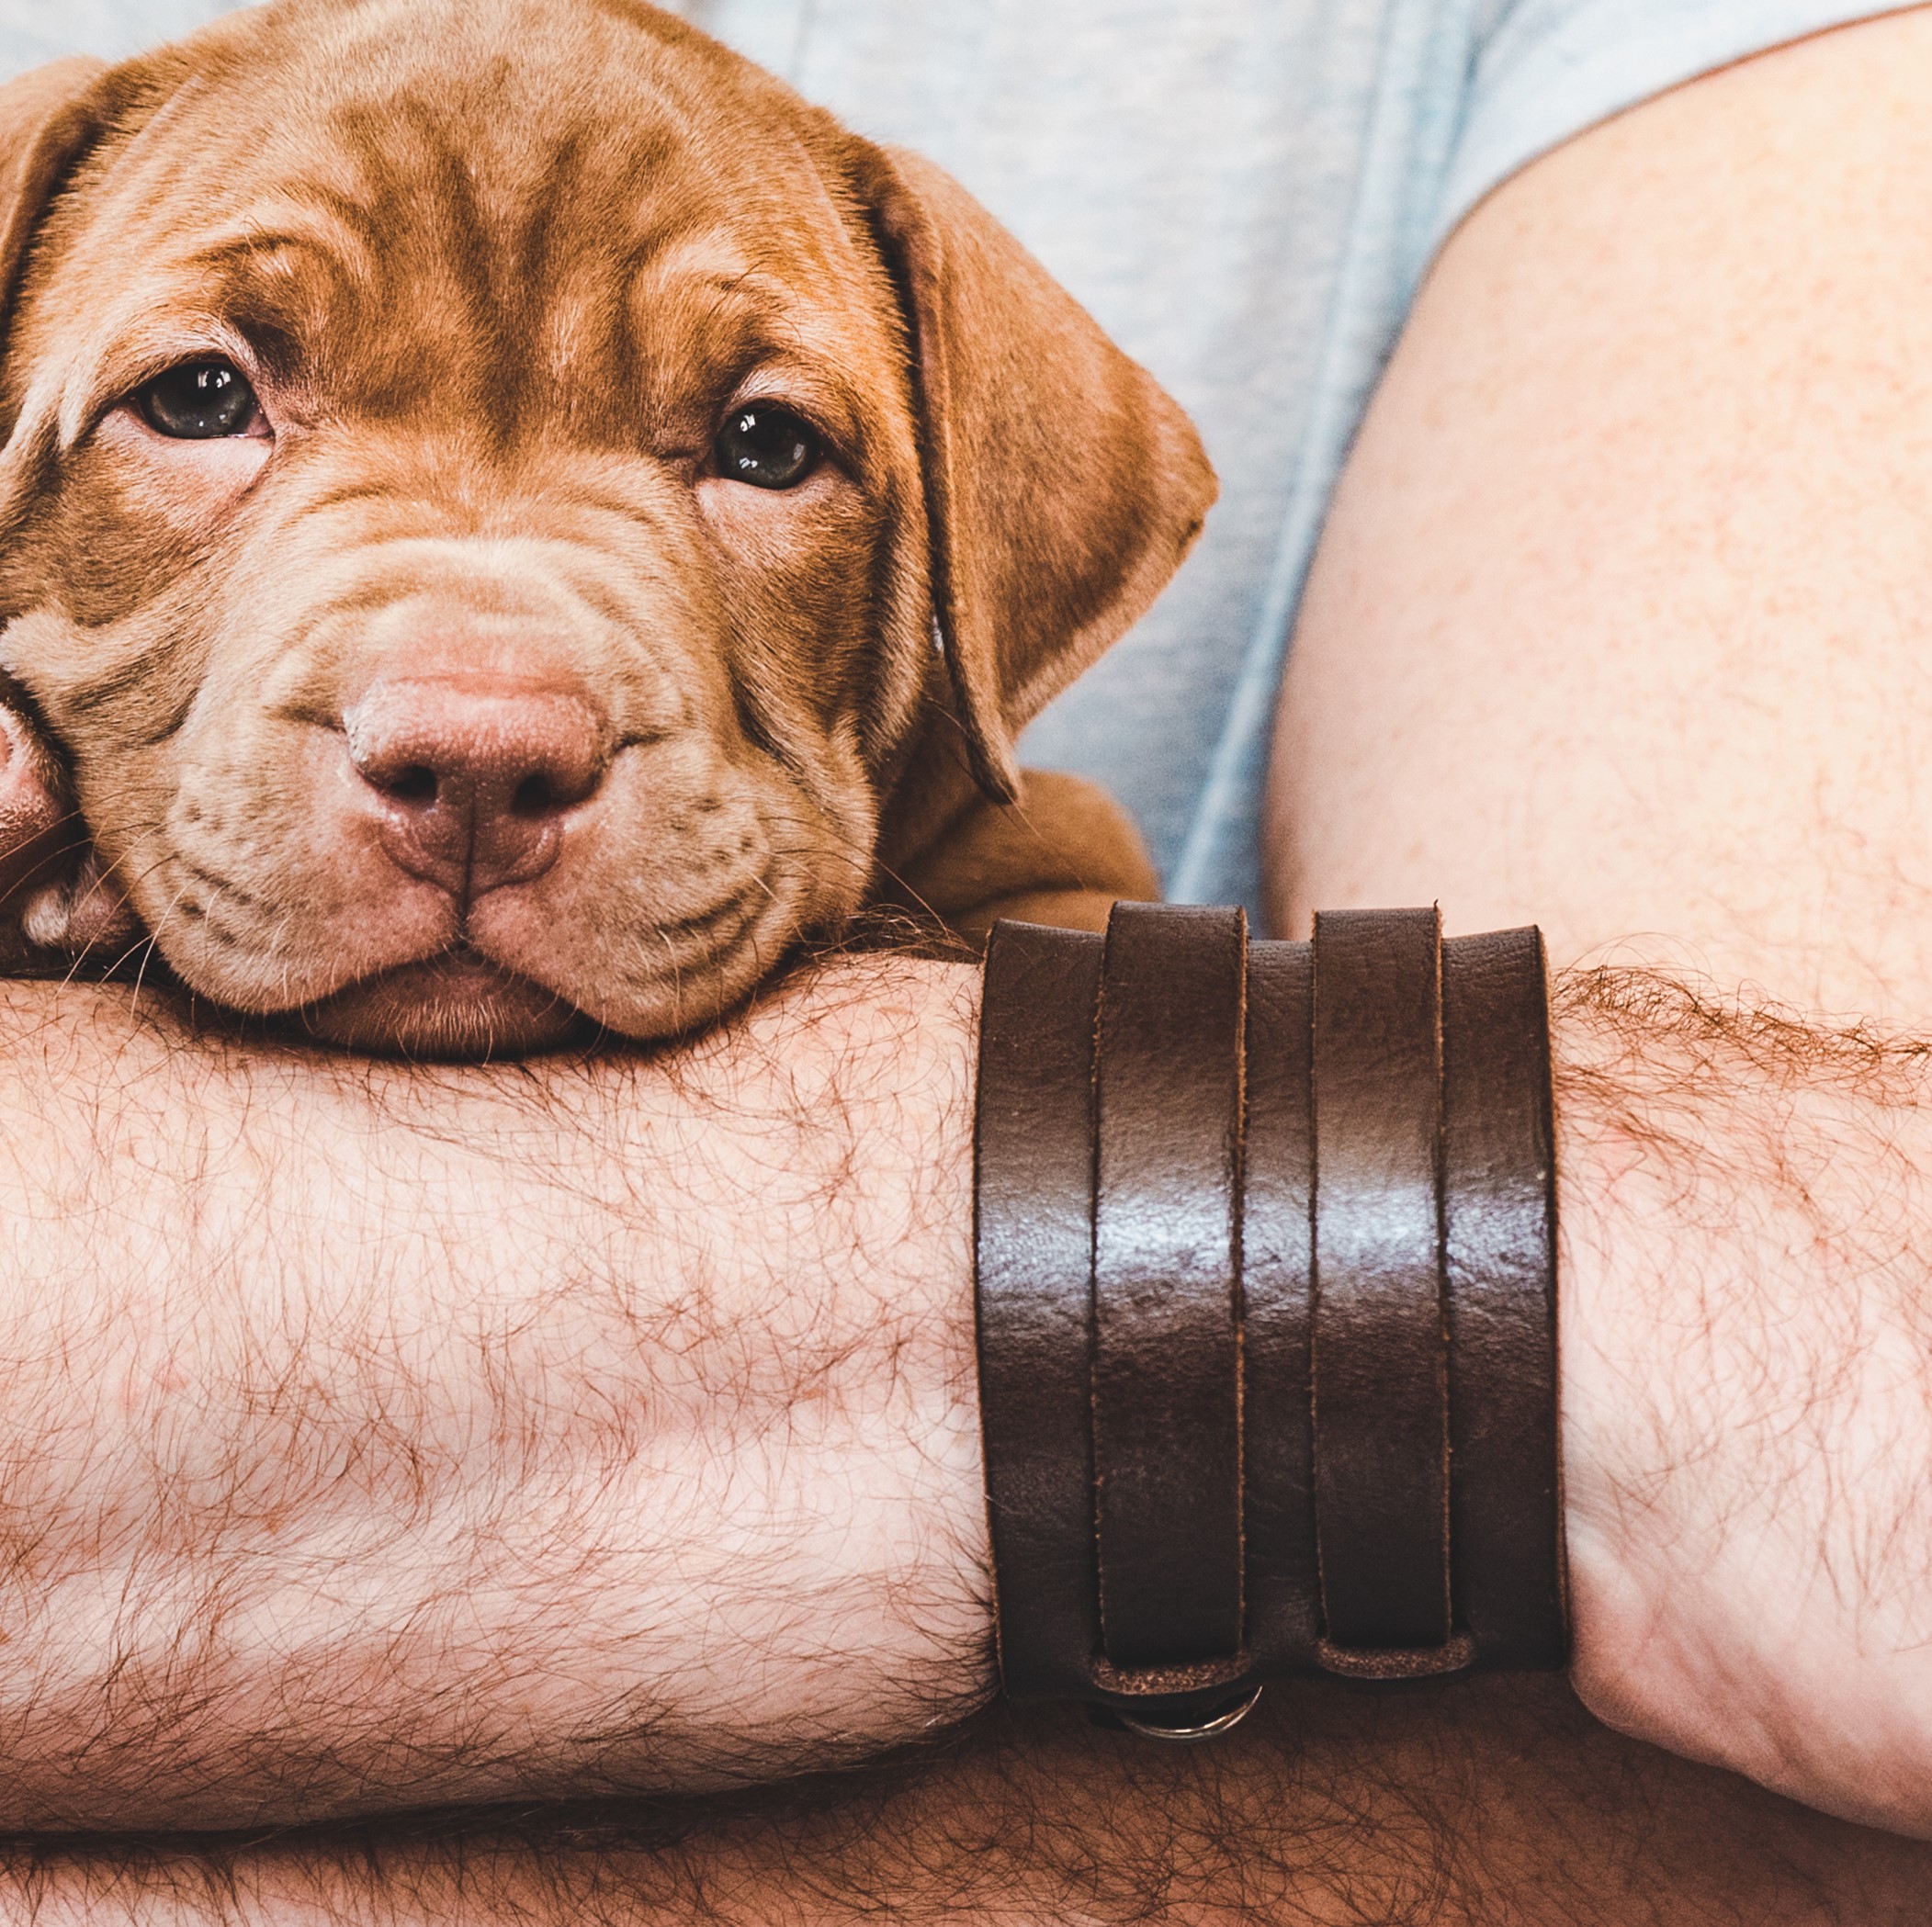 A dog rests its head on a wrist covered in several leather bracelets